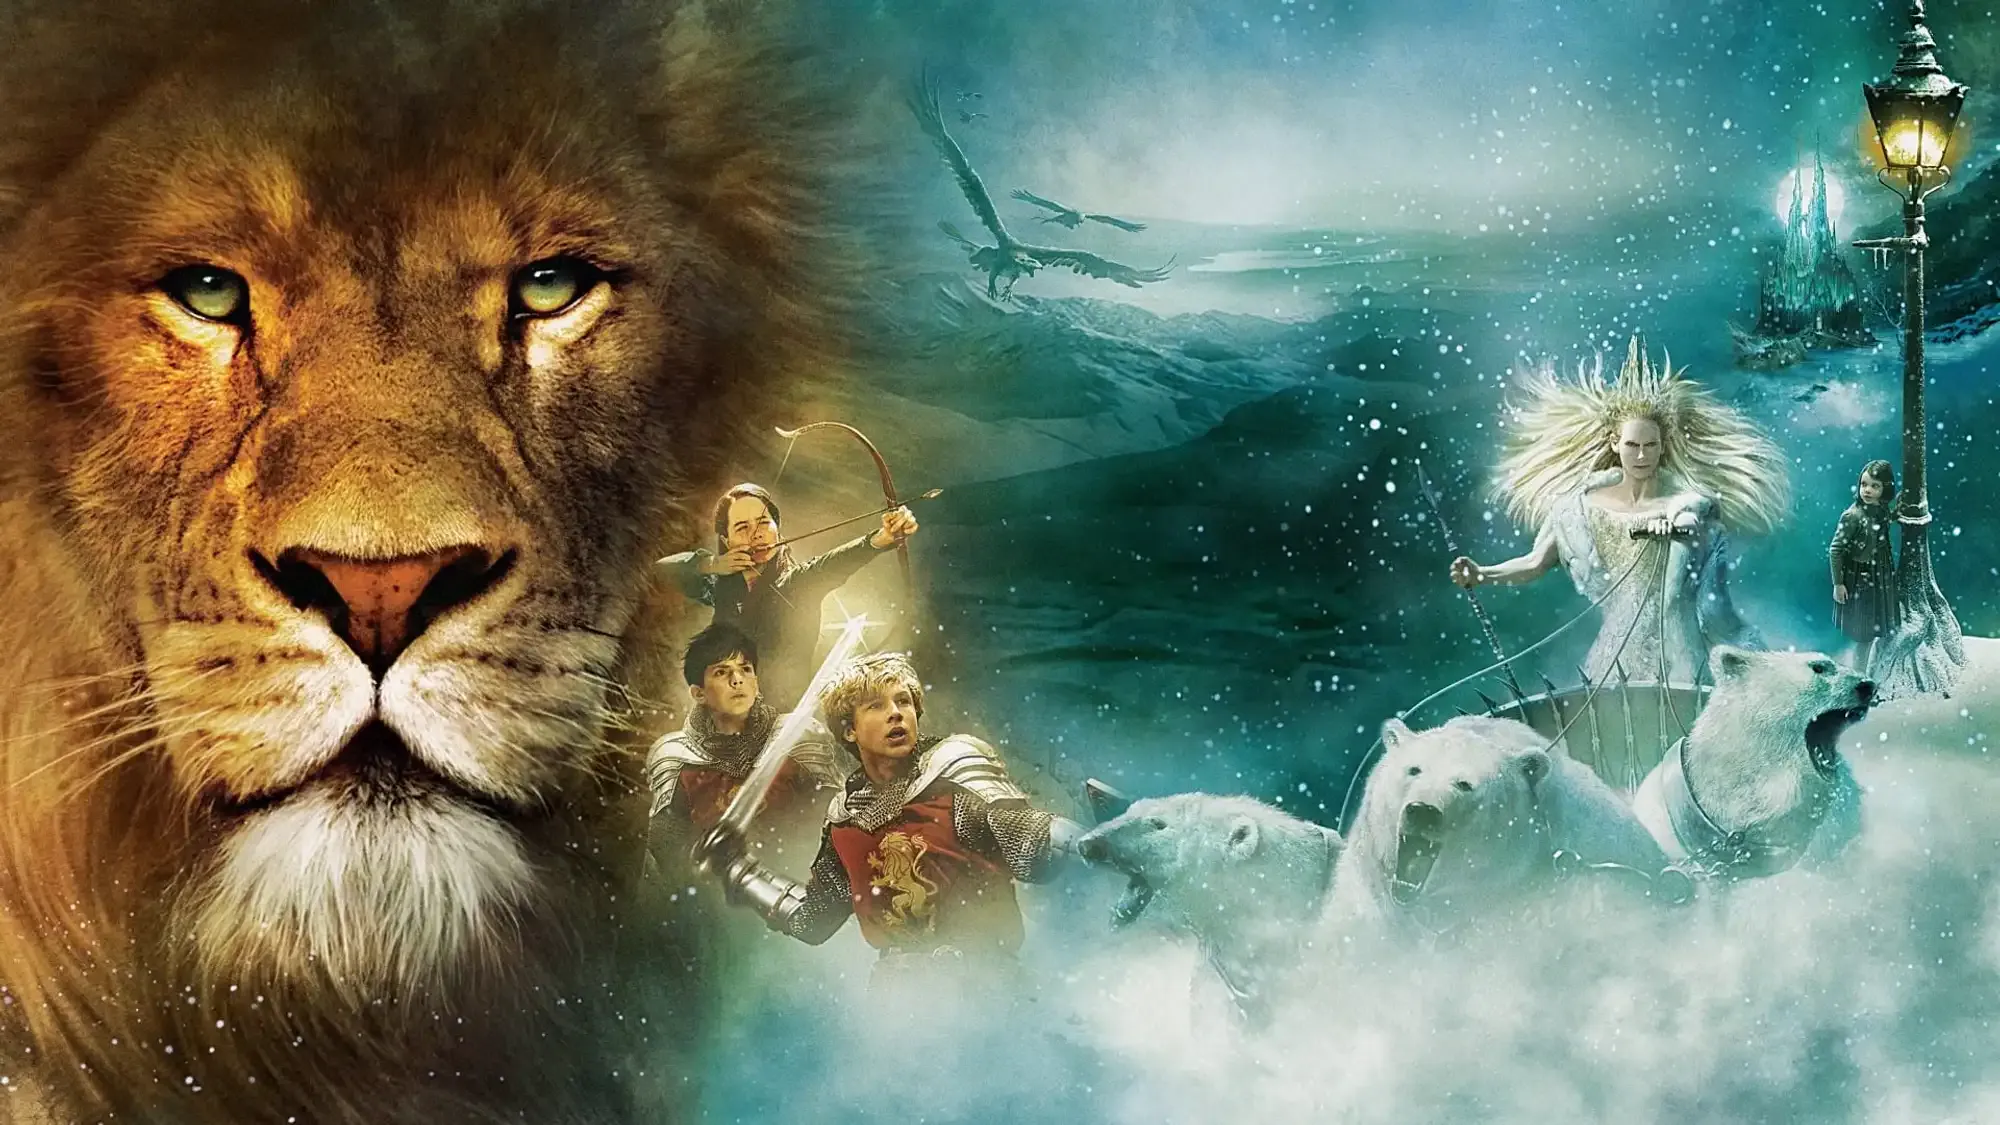 The Chronicles of Narnia: The Lion, the Witch and the Wardrobe movie review